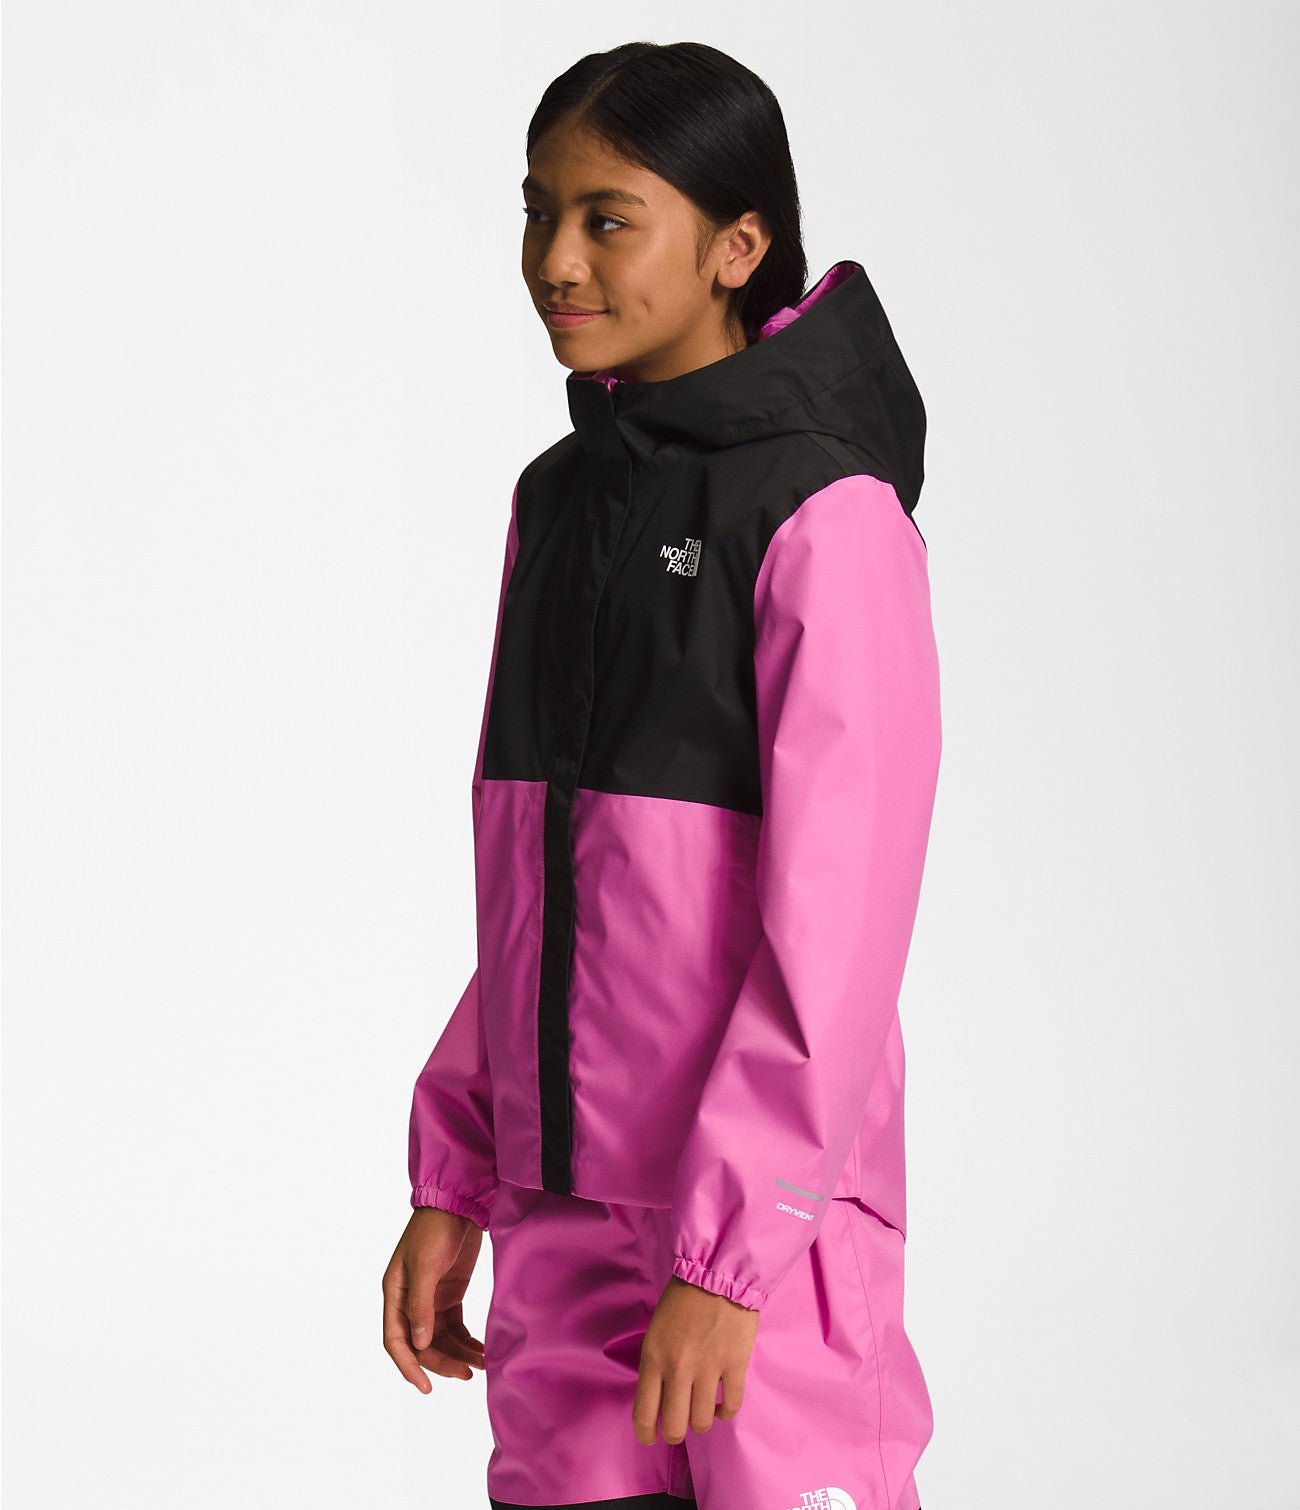 Side view of a Smiling girl wearing Super Pink The North Face Girls' Warm Storm Jacket - Mountain Kids Outfitters: Stylish and Weather-Ready Outerwear